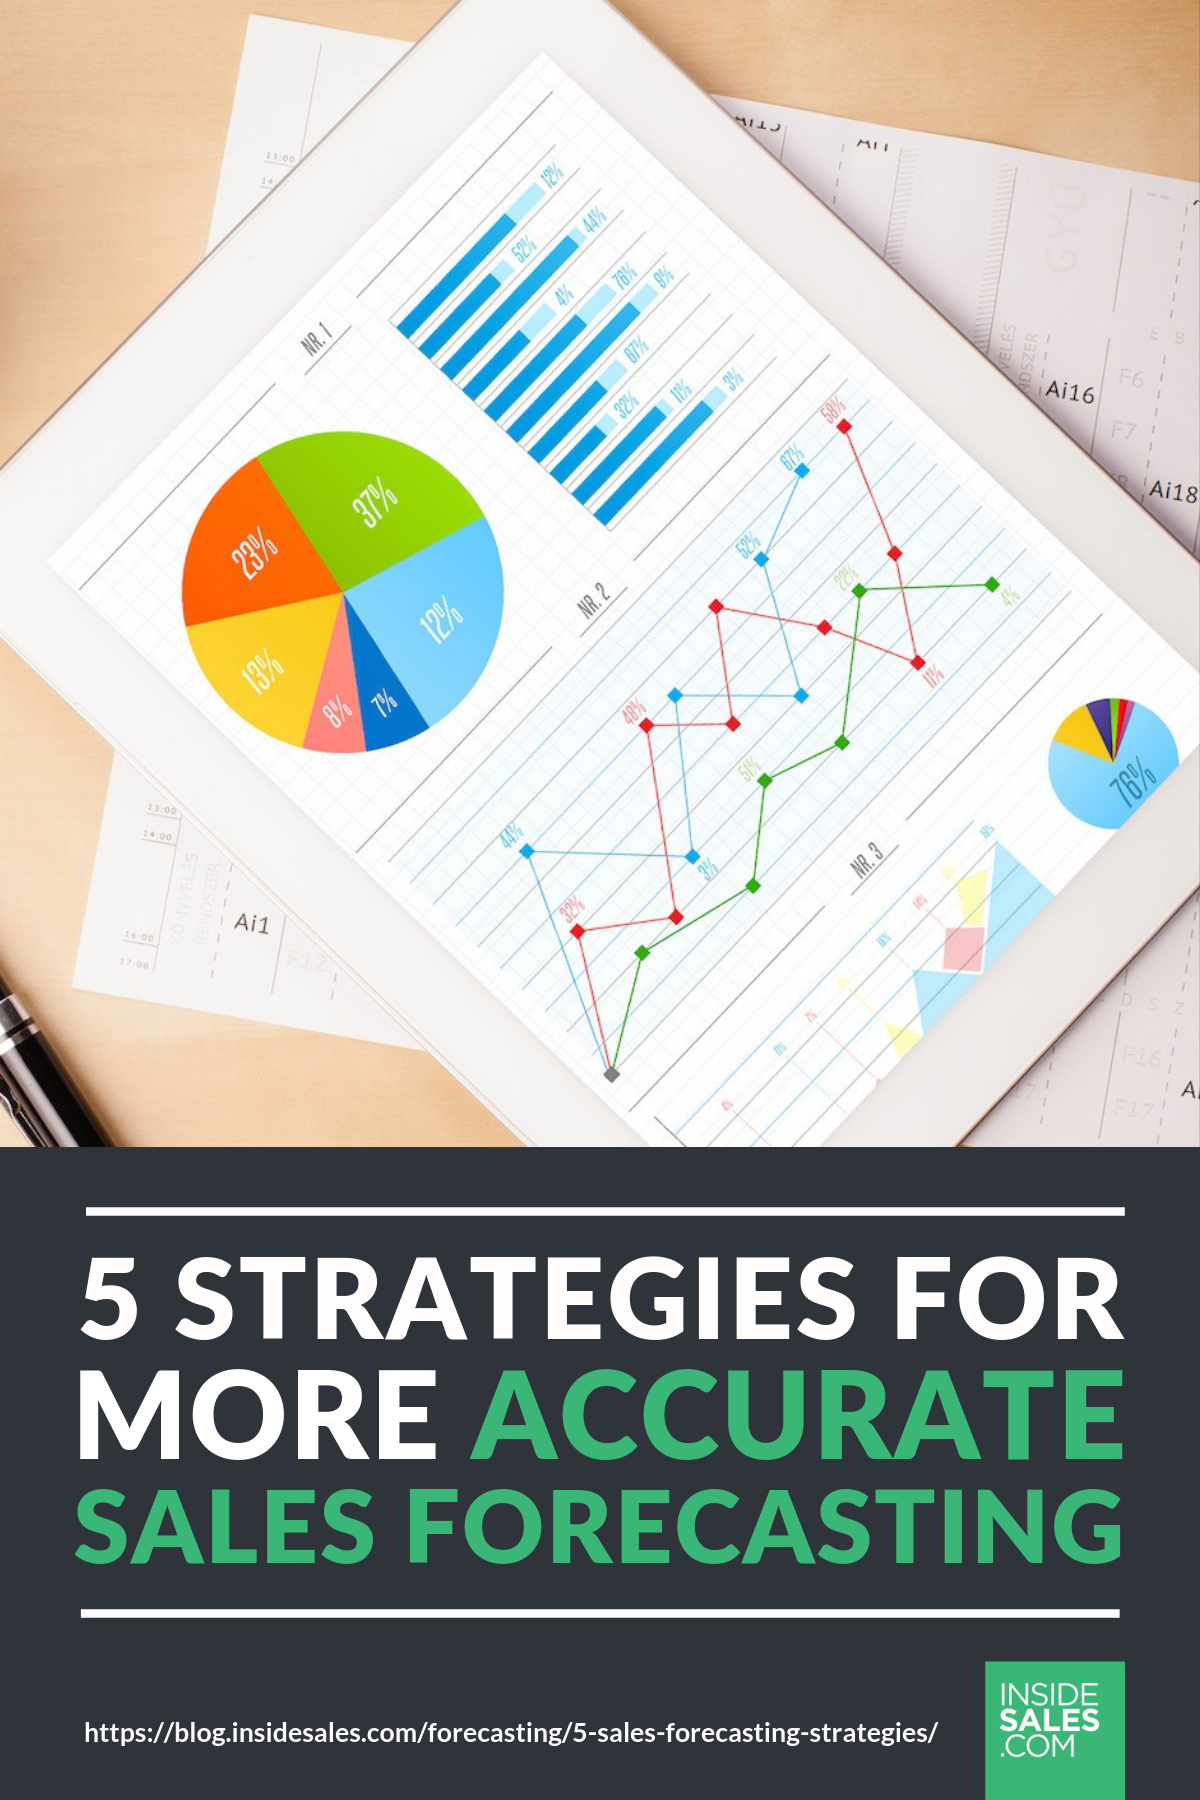 5 Strategies For More Accurate Sales Forecasting https://www.insidesales.com/blog/forecasting/5-sales-forecasting-strategies/